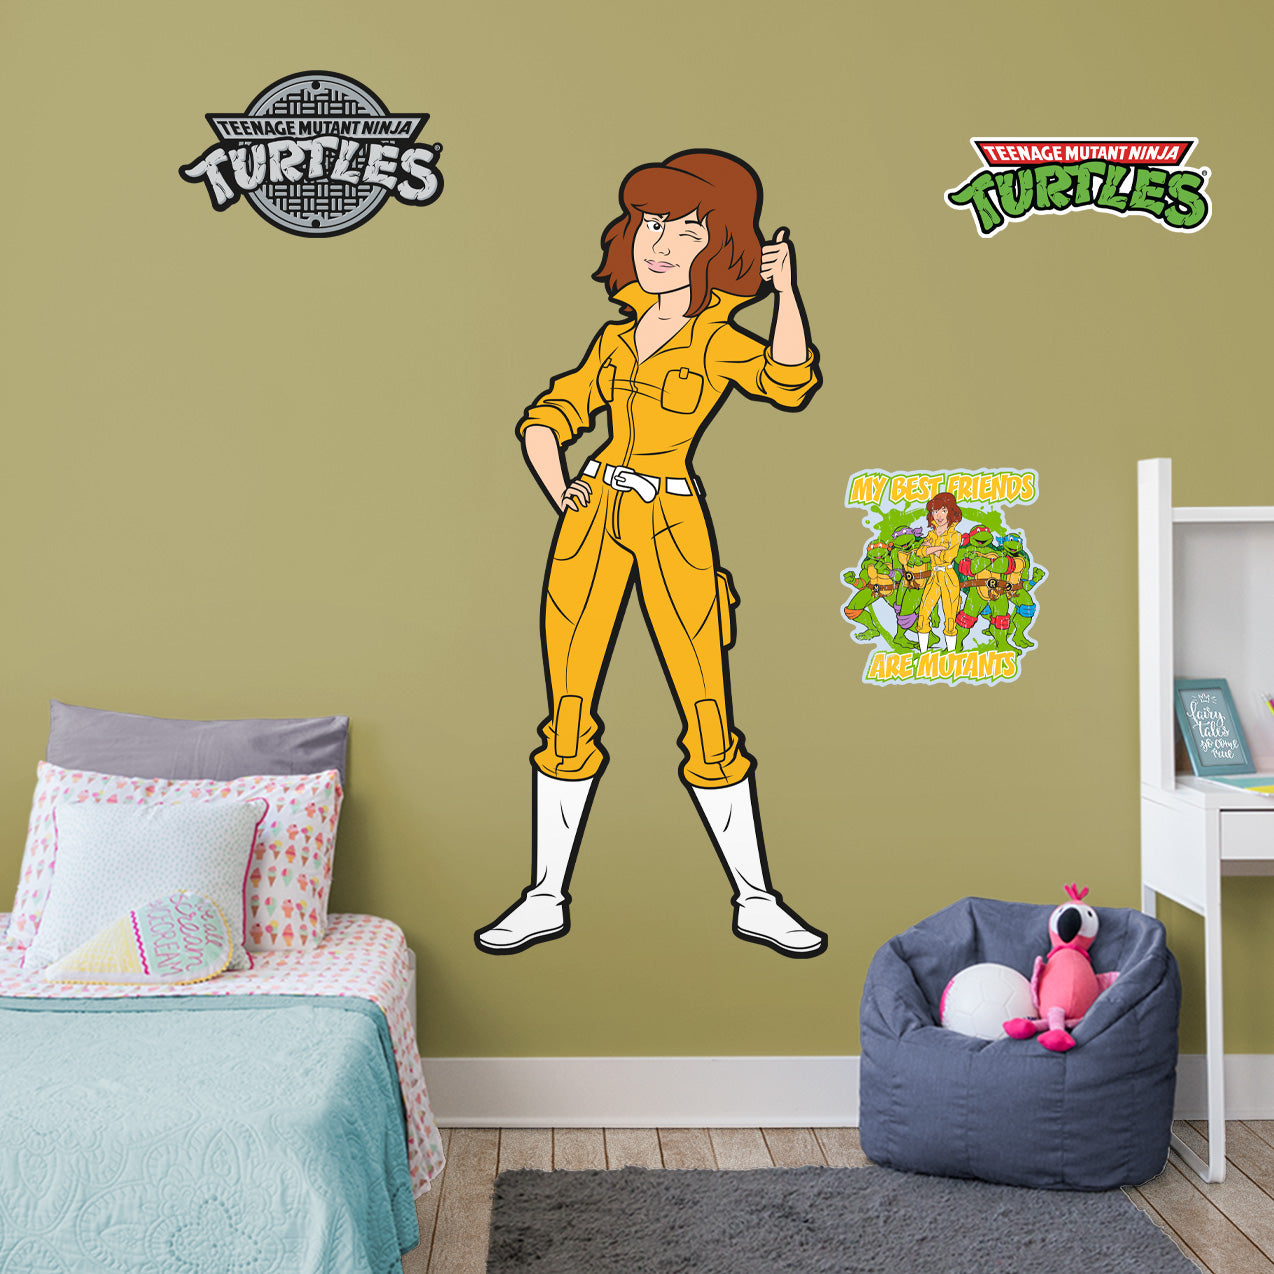 Life-Size Character +3 Decals  (34"W x 78"H) 